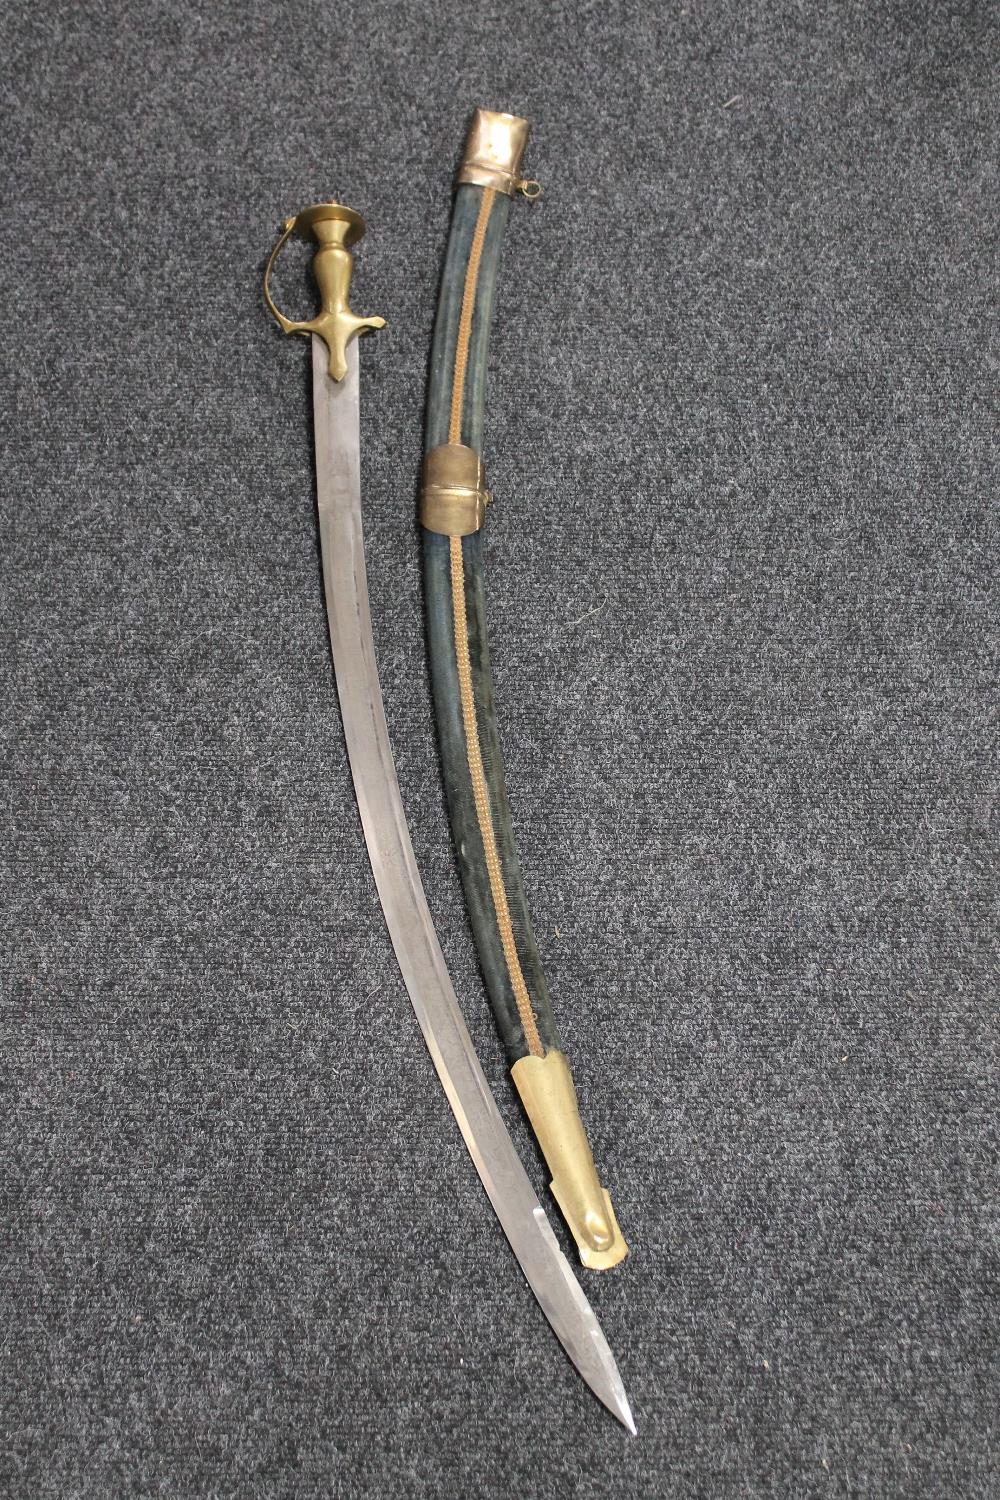 An Indian brass mounted sword in scabbard